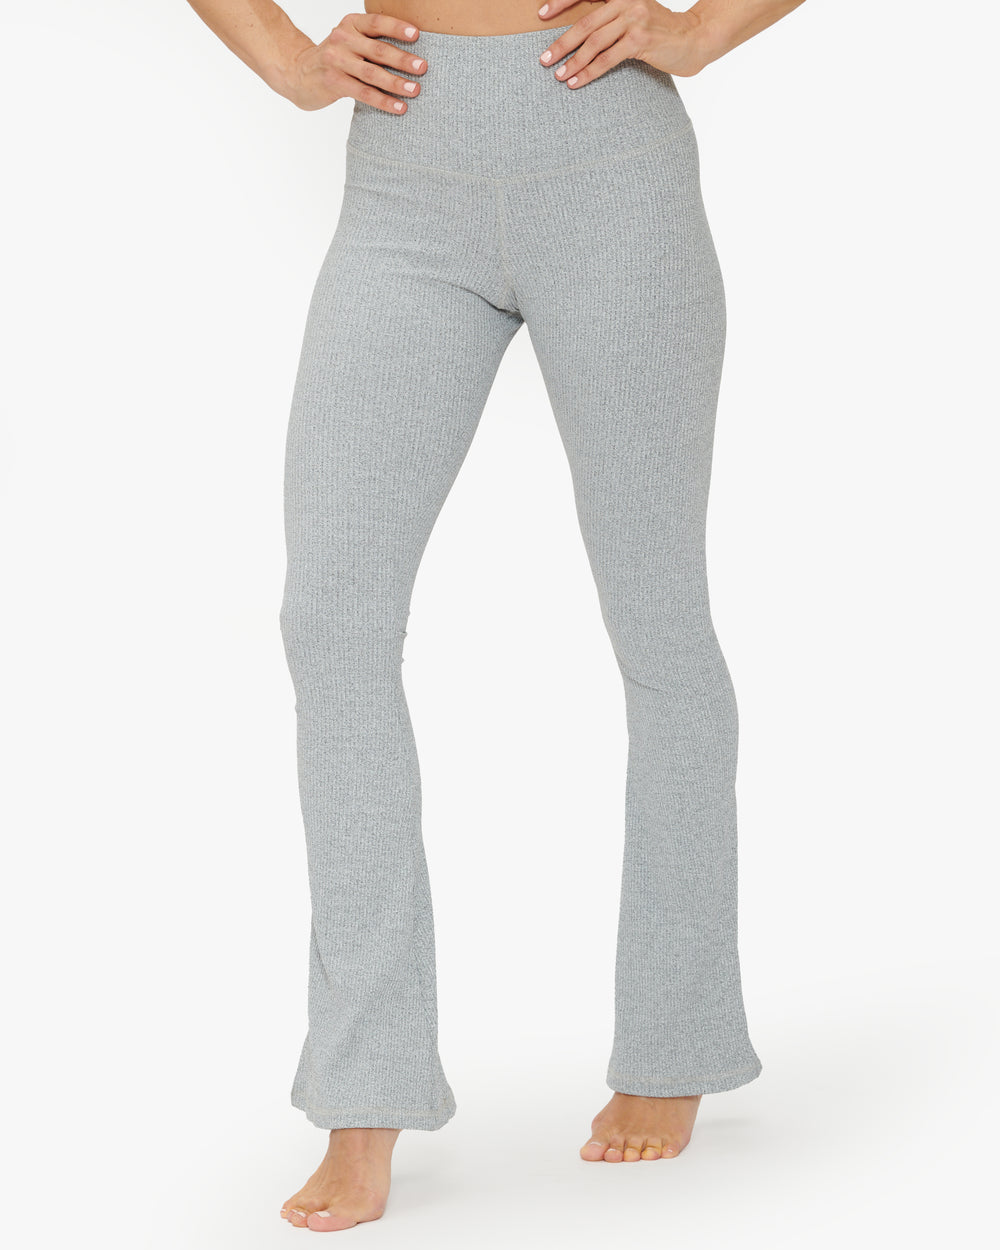 Strut This The Beau Pant